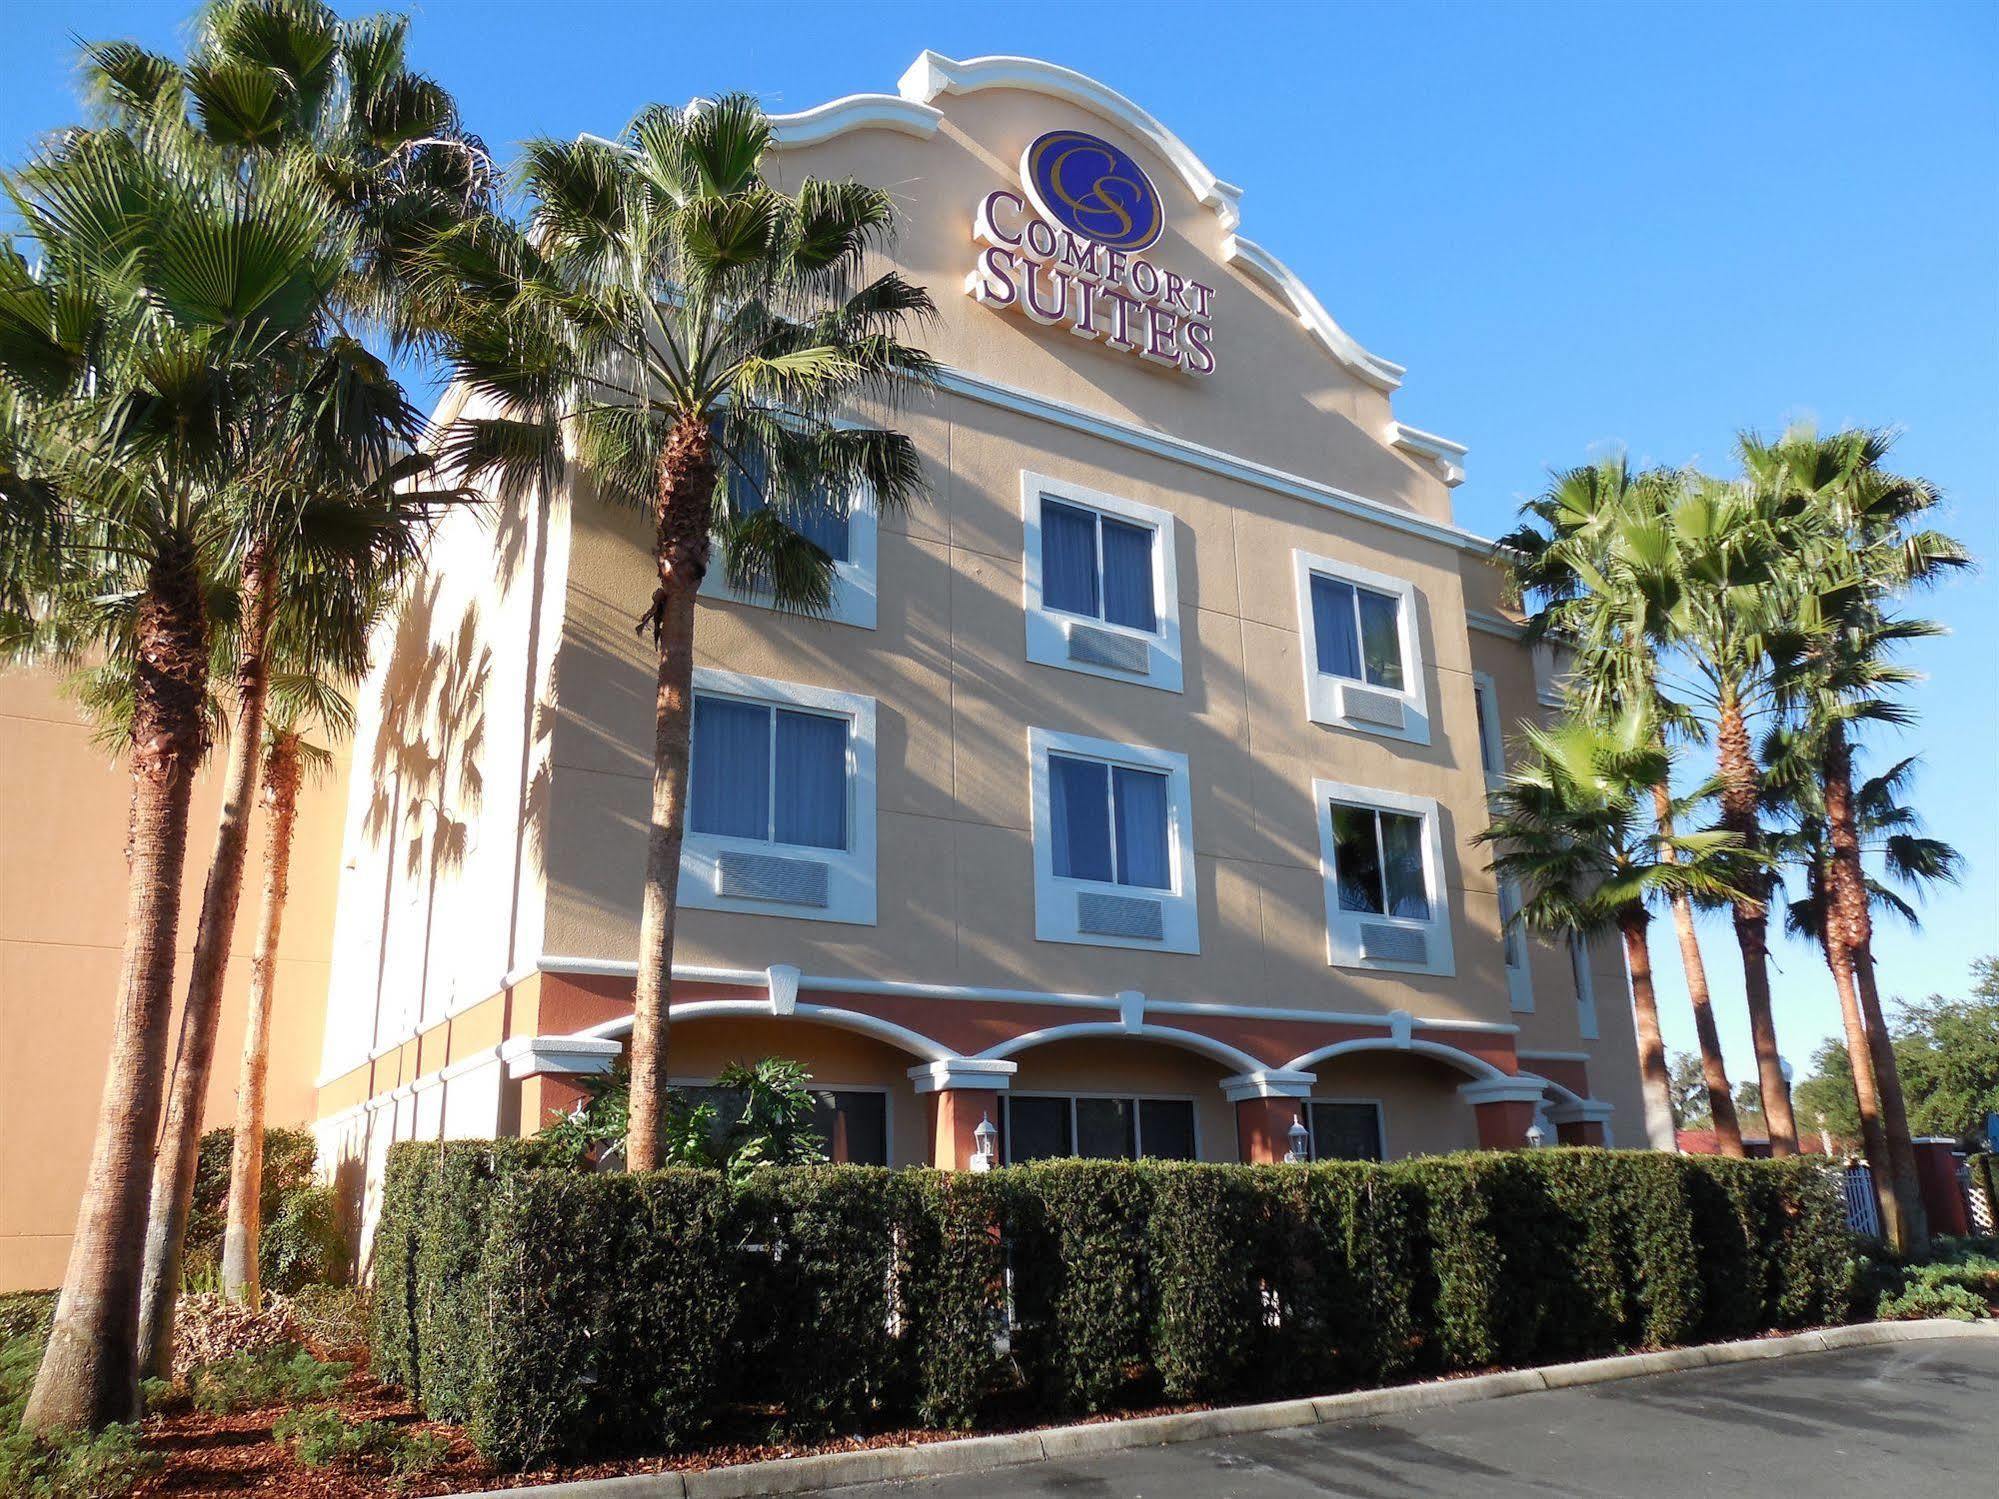 Hotel in Lady Lake, FL, Comfort Suites® Official Site